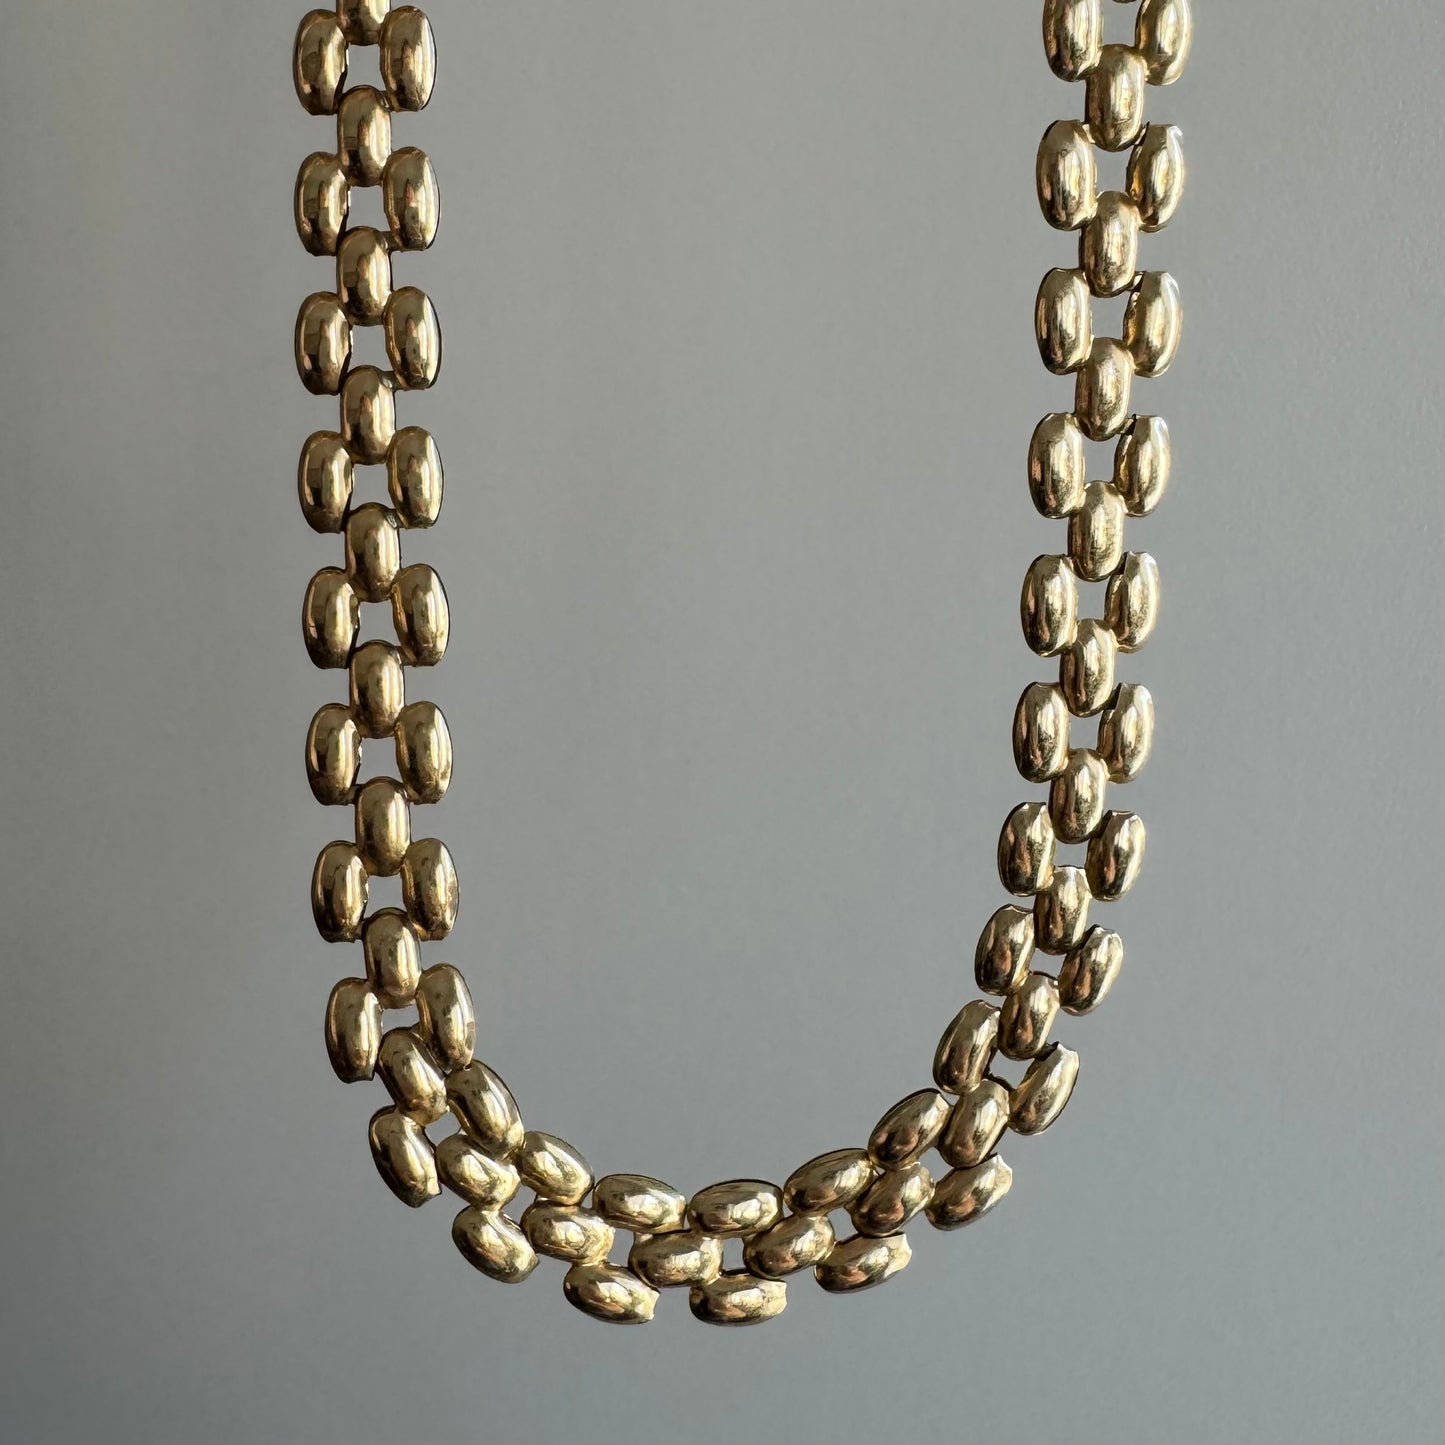 P R E - L O V E D // like a panther / 10k yellow gold puffy panther link necklace / 17", 8g